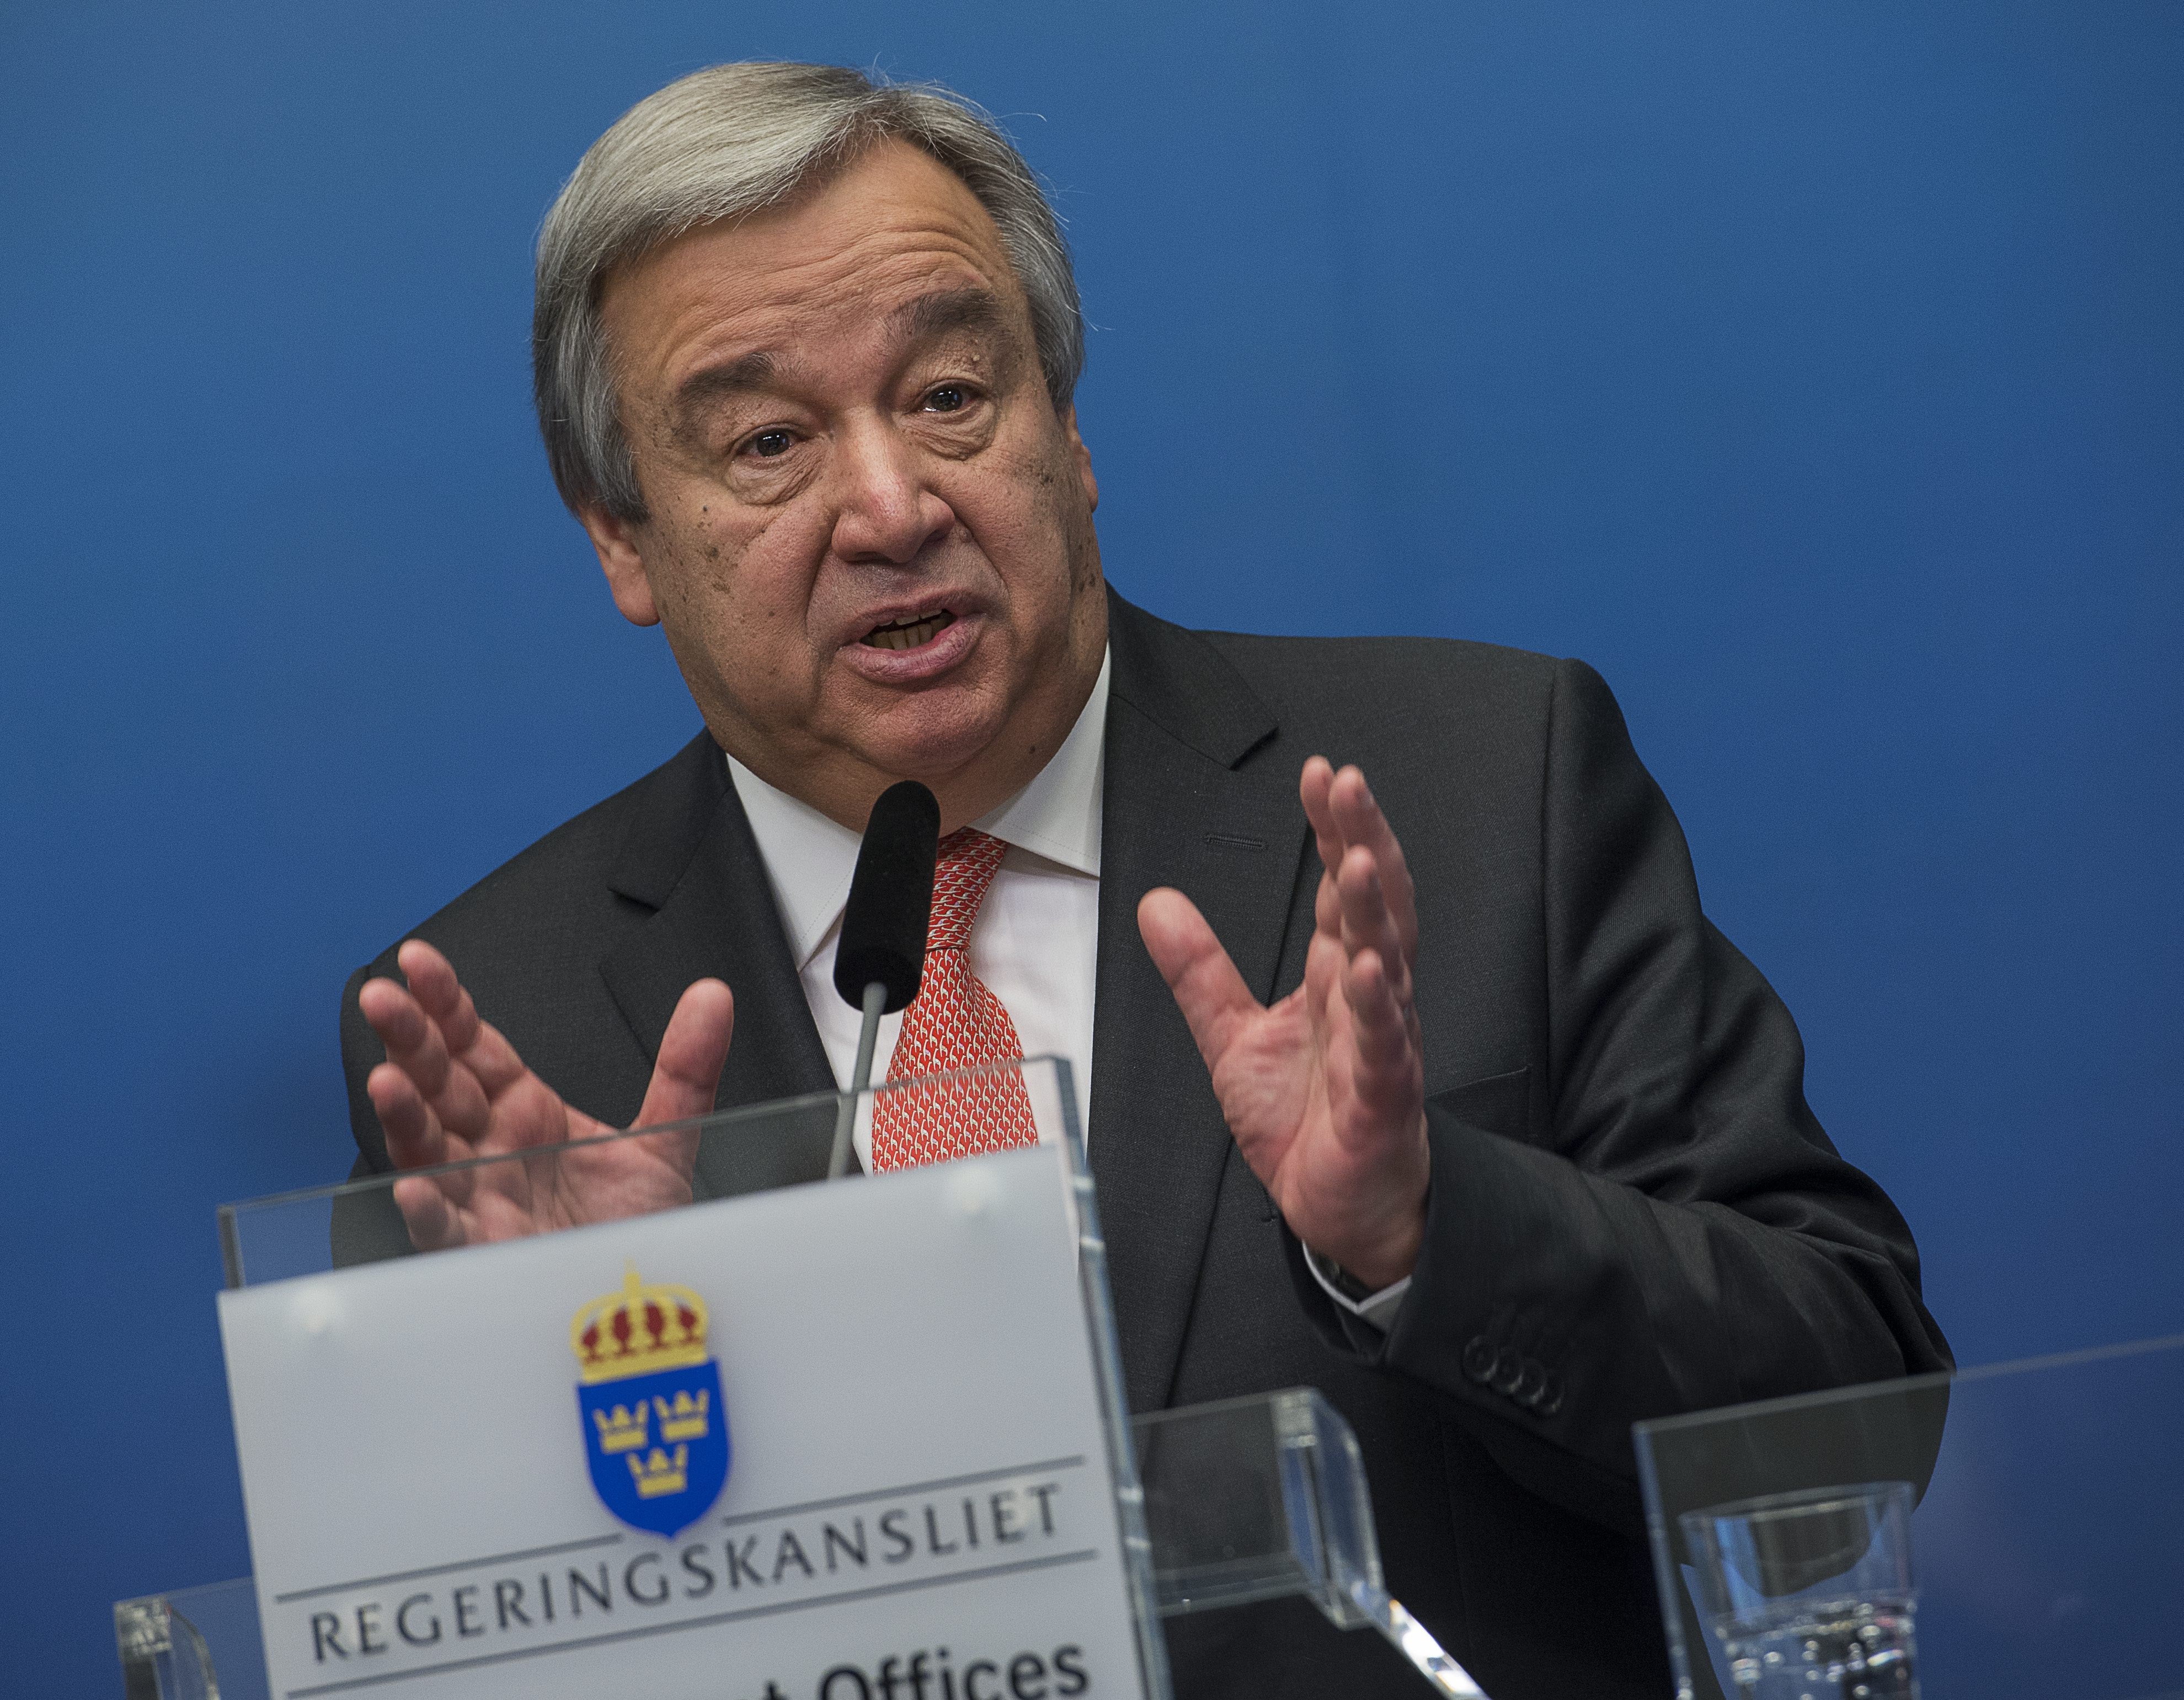 UN High Commissioner for Refugees (UNHCR) Antonio Guterres speaks during a news conference at the Swedish government headquarters Rosenbad in Stockholm, Sweden, on February 3, 2015. The UN General Assembly will accept Guterres as the next Secretary General this week.